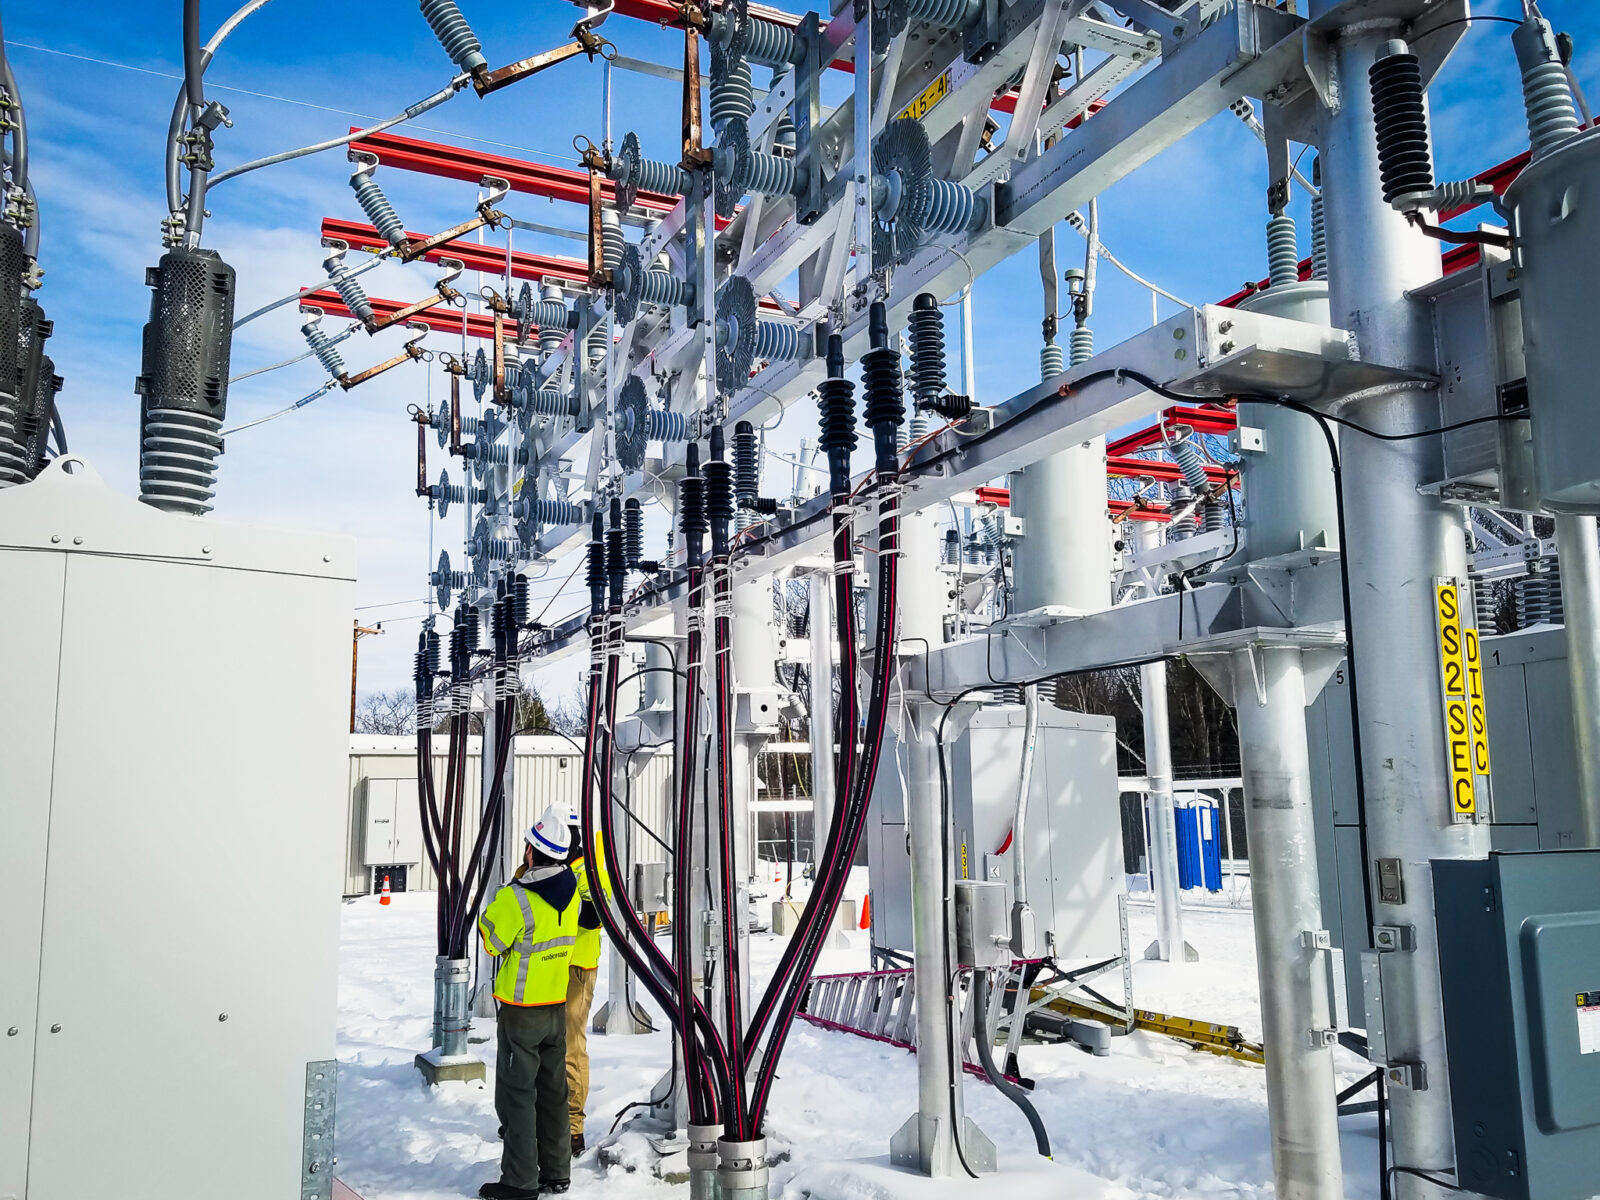 Two workers in a snowy substation